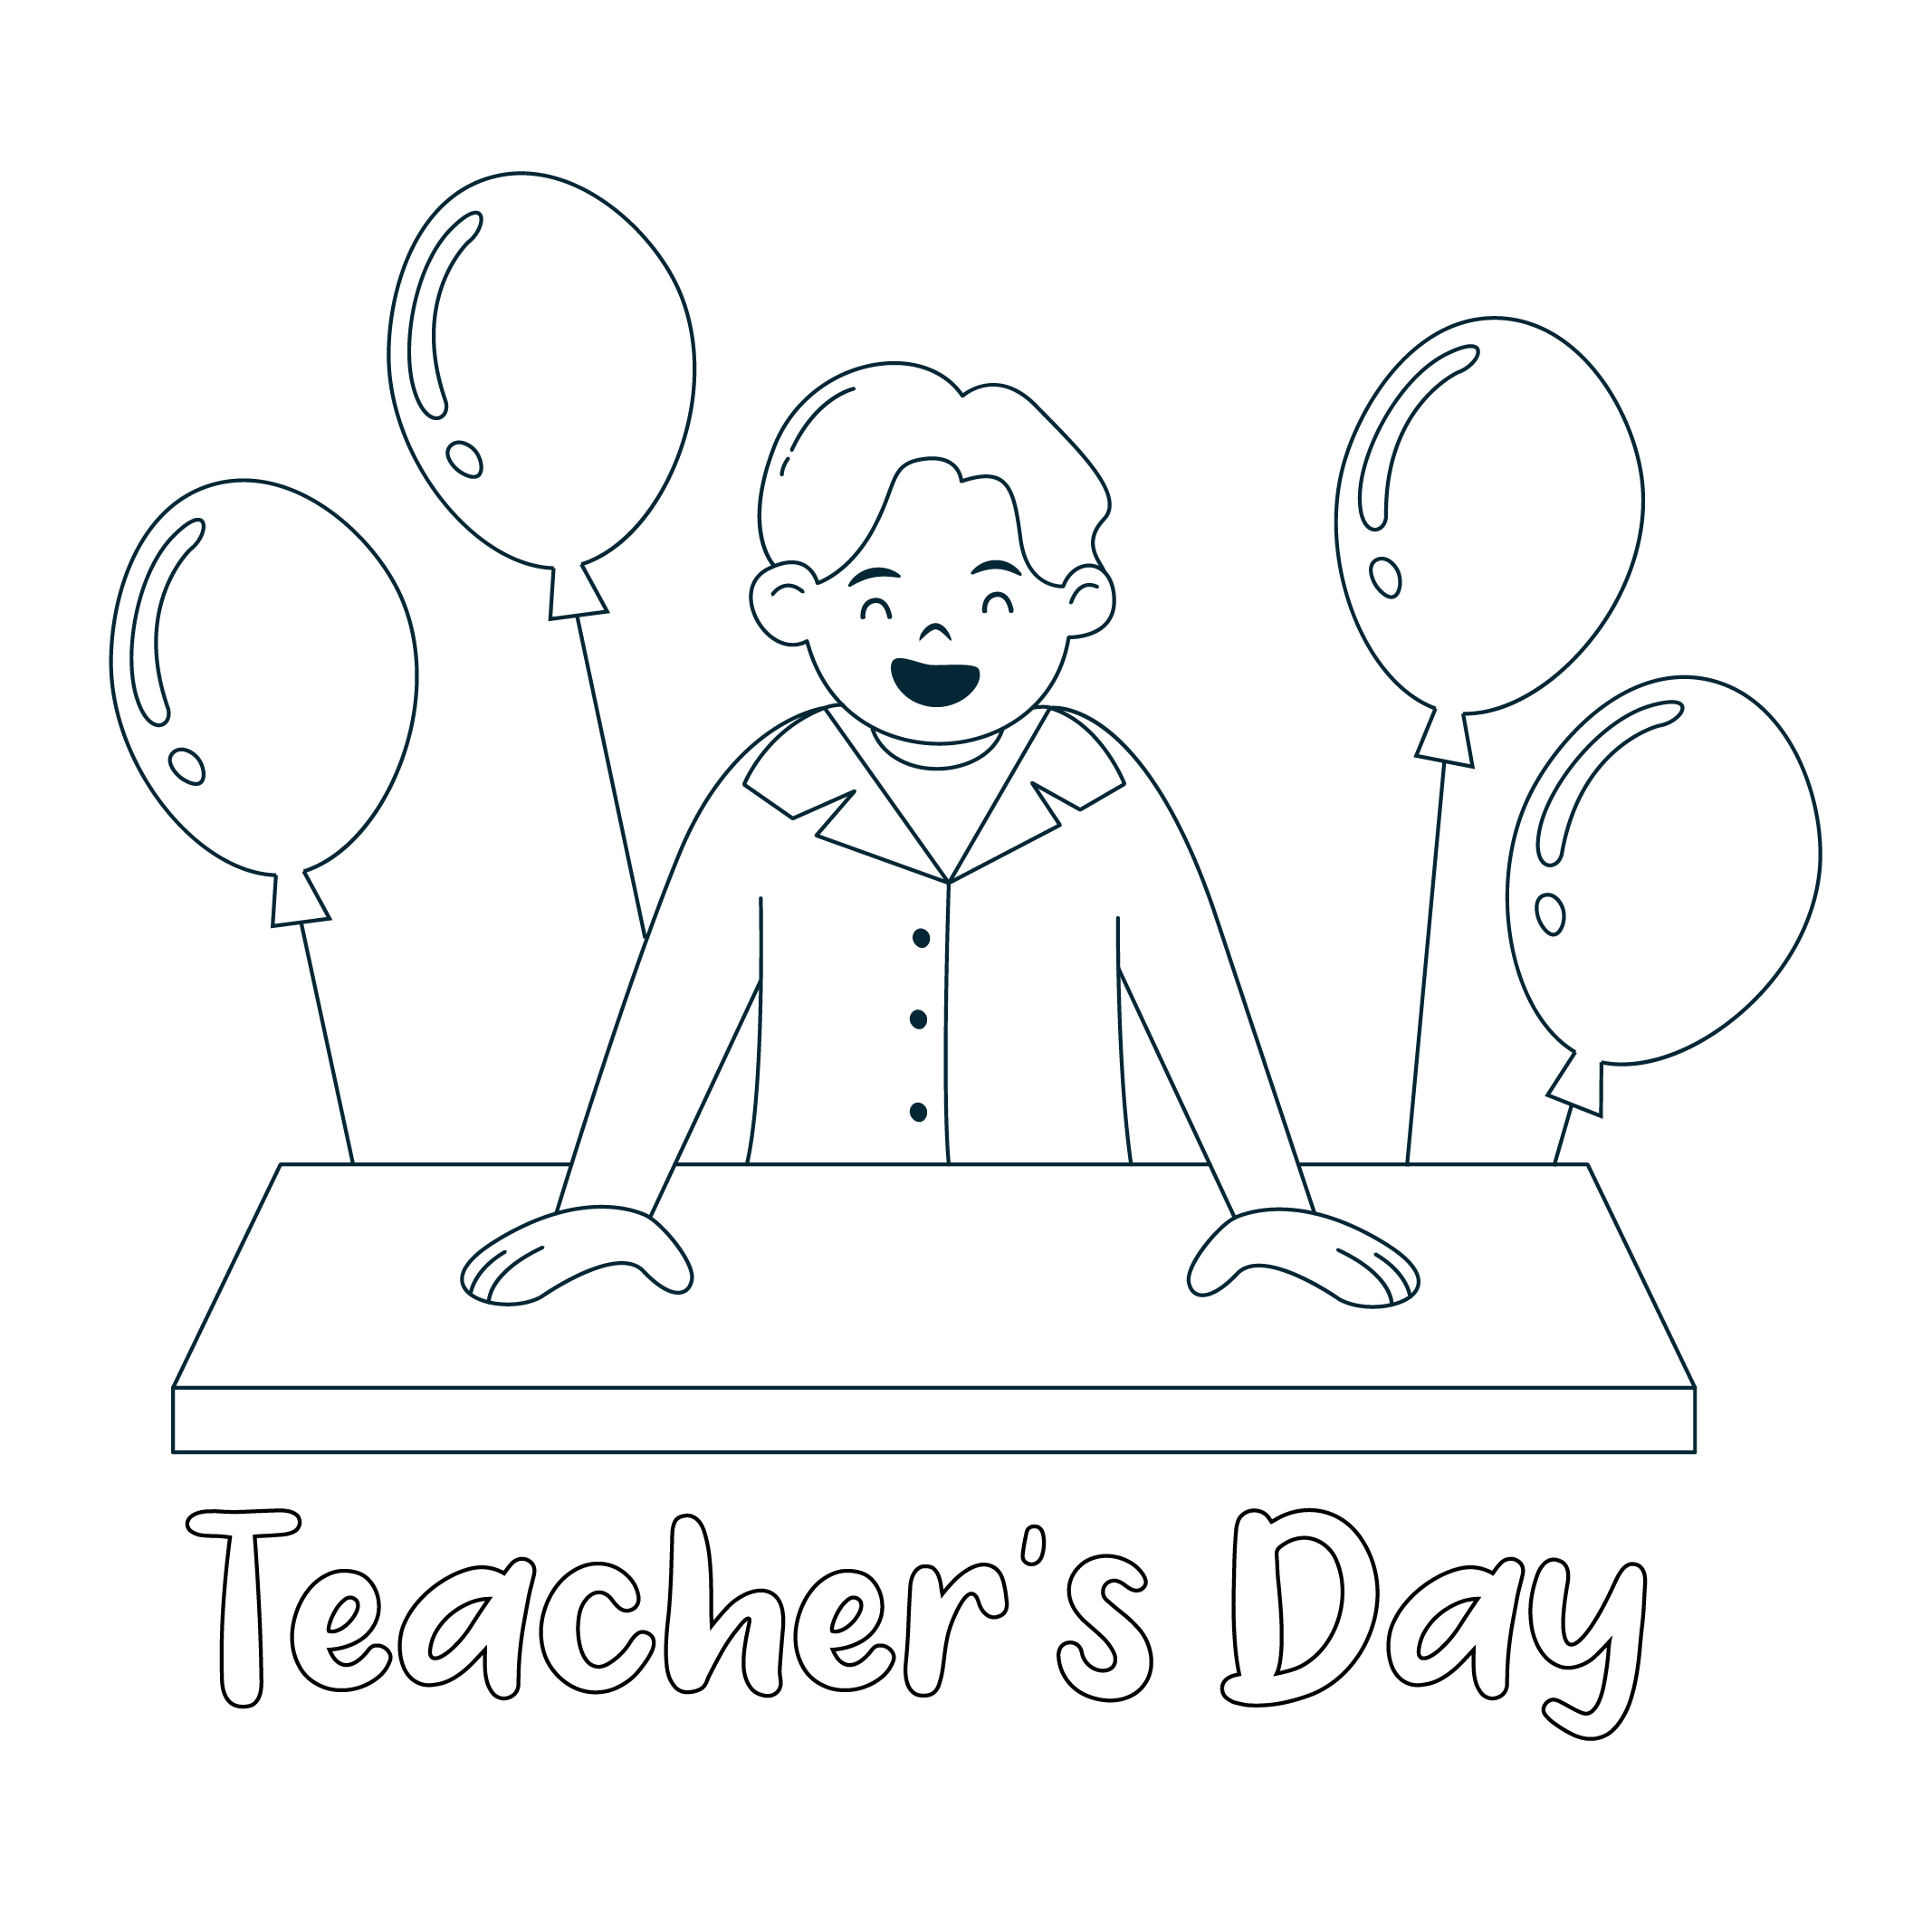 Teacher's Day Special Drawing Step-by-step | DIY Happy Teacher's Day Create  Greeting Card Poster - YouTube